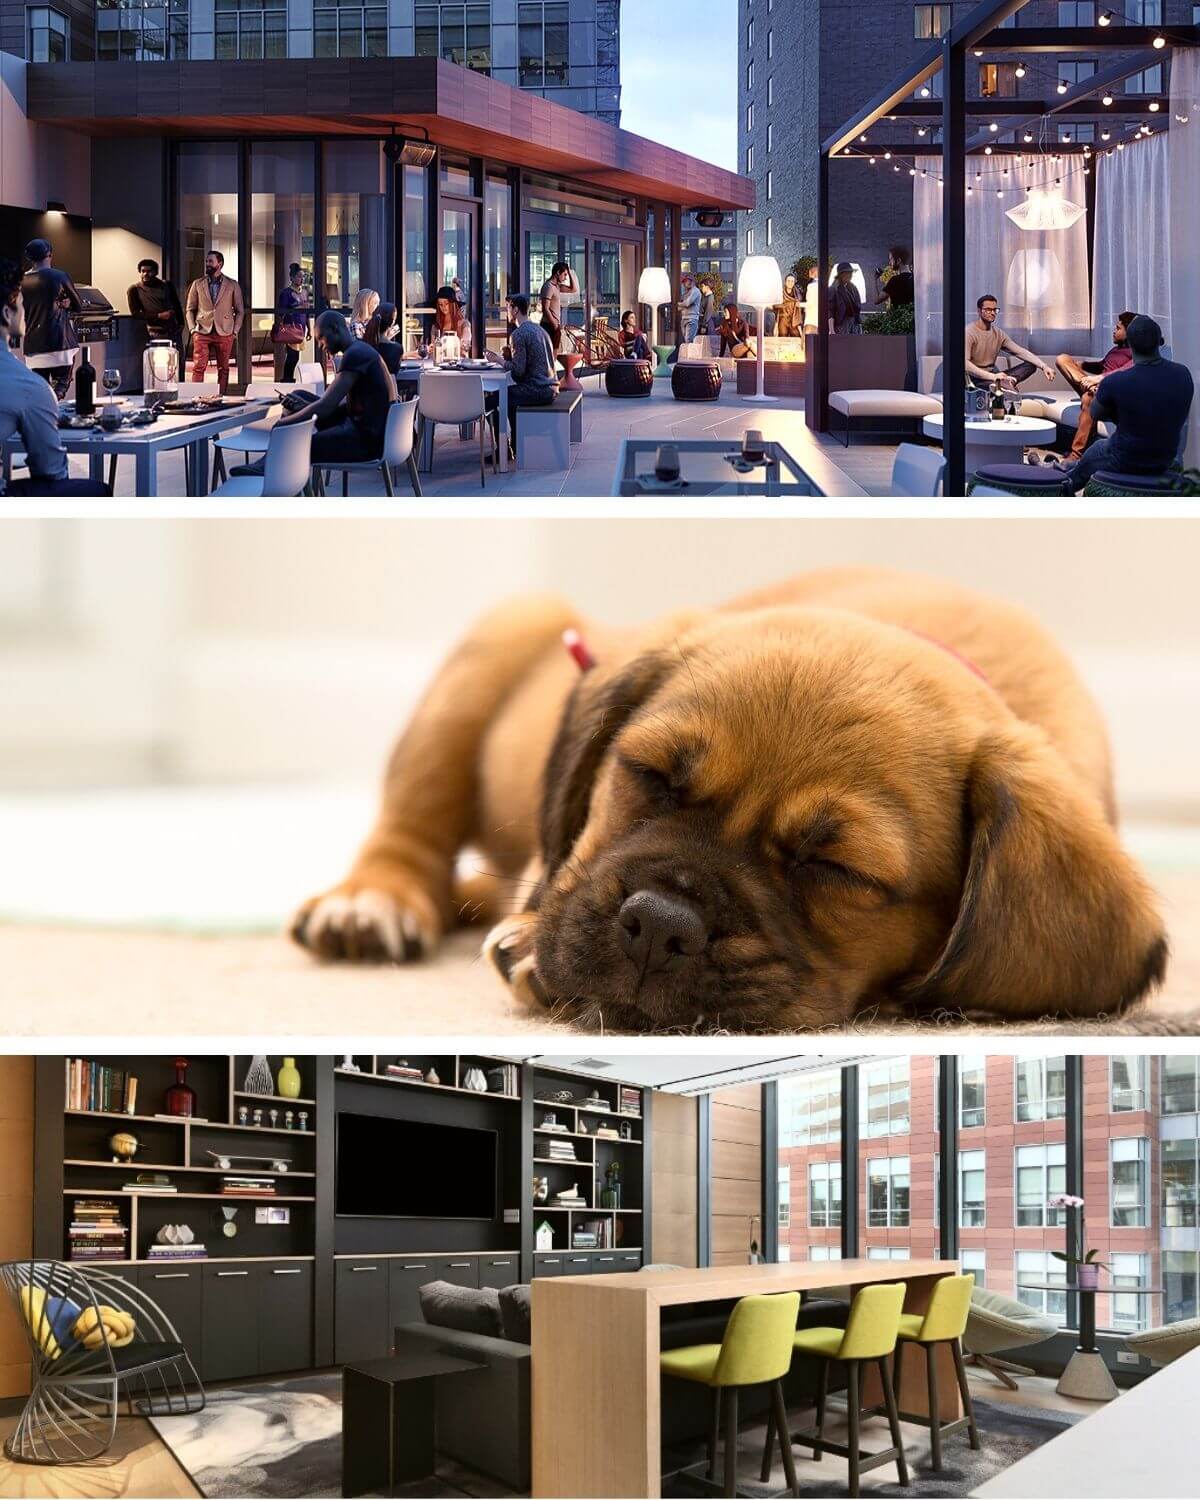 Little puppy sleeping, people socialising outside at night and a comfortable furnished apartment interior